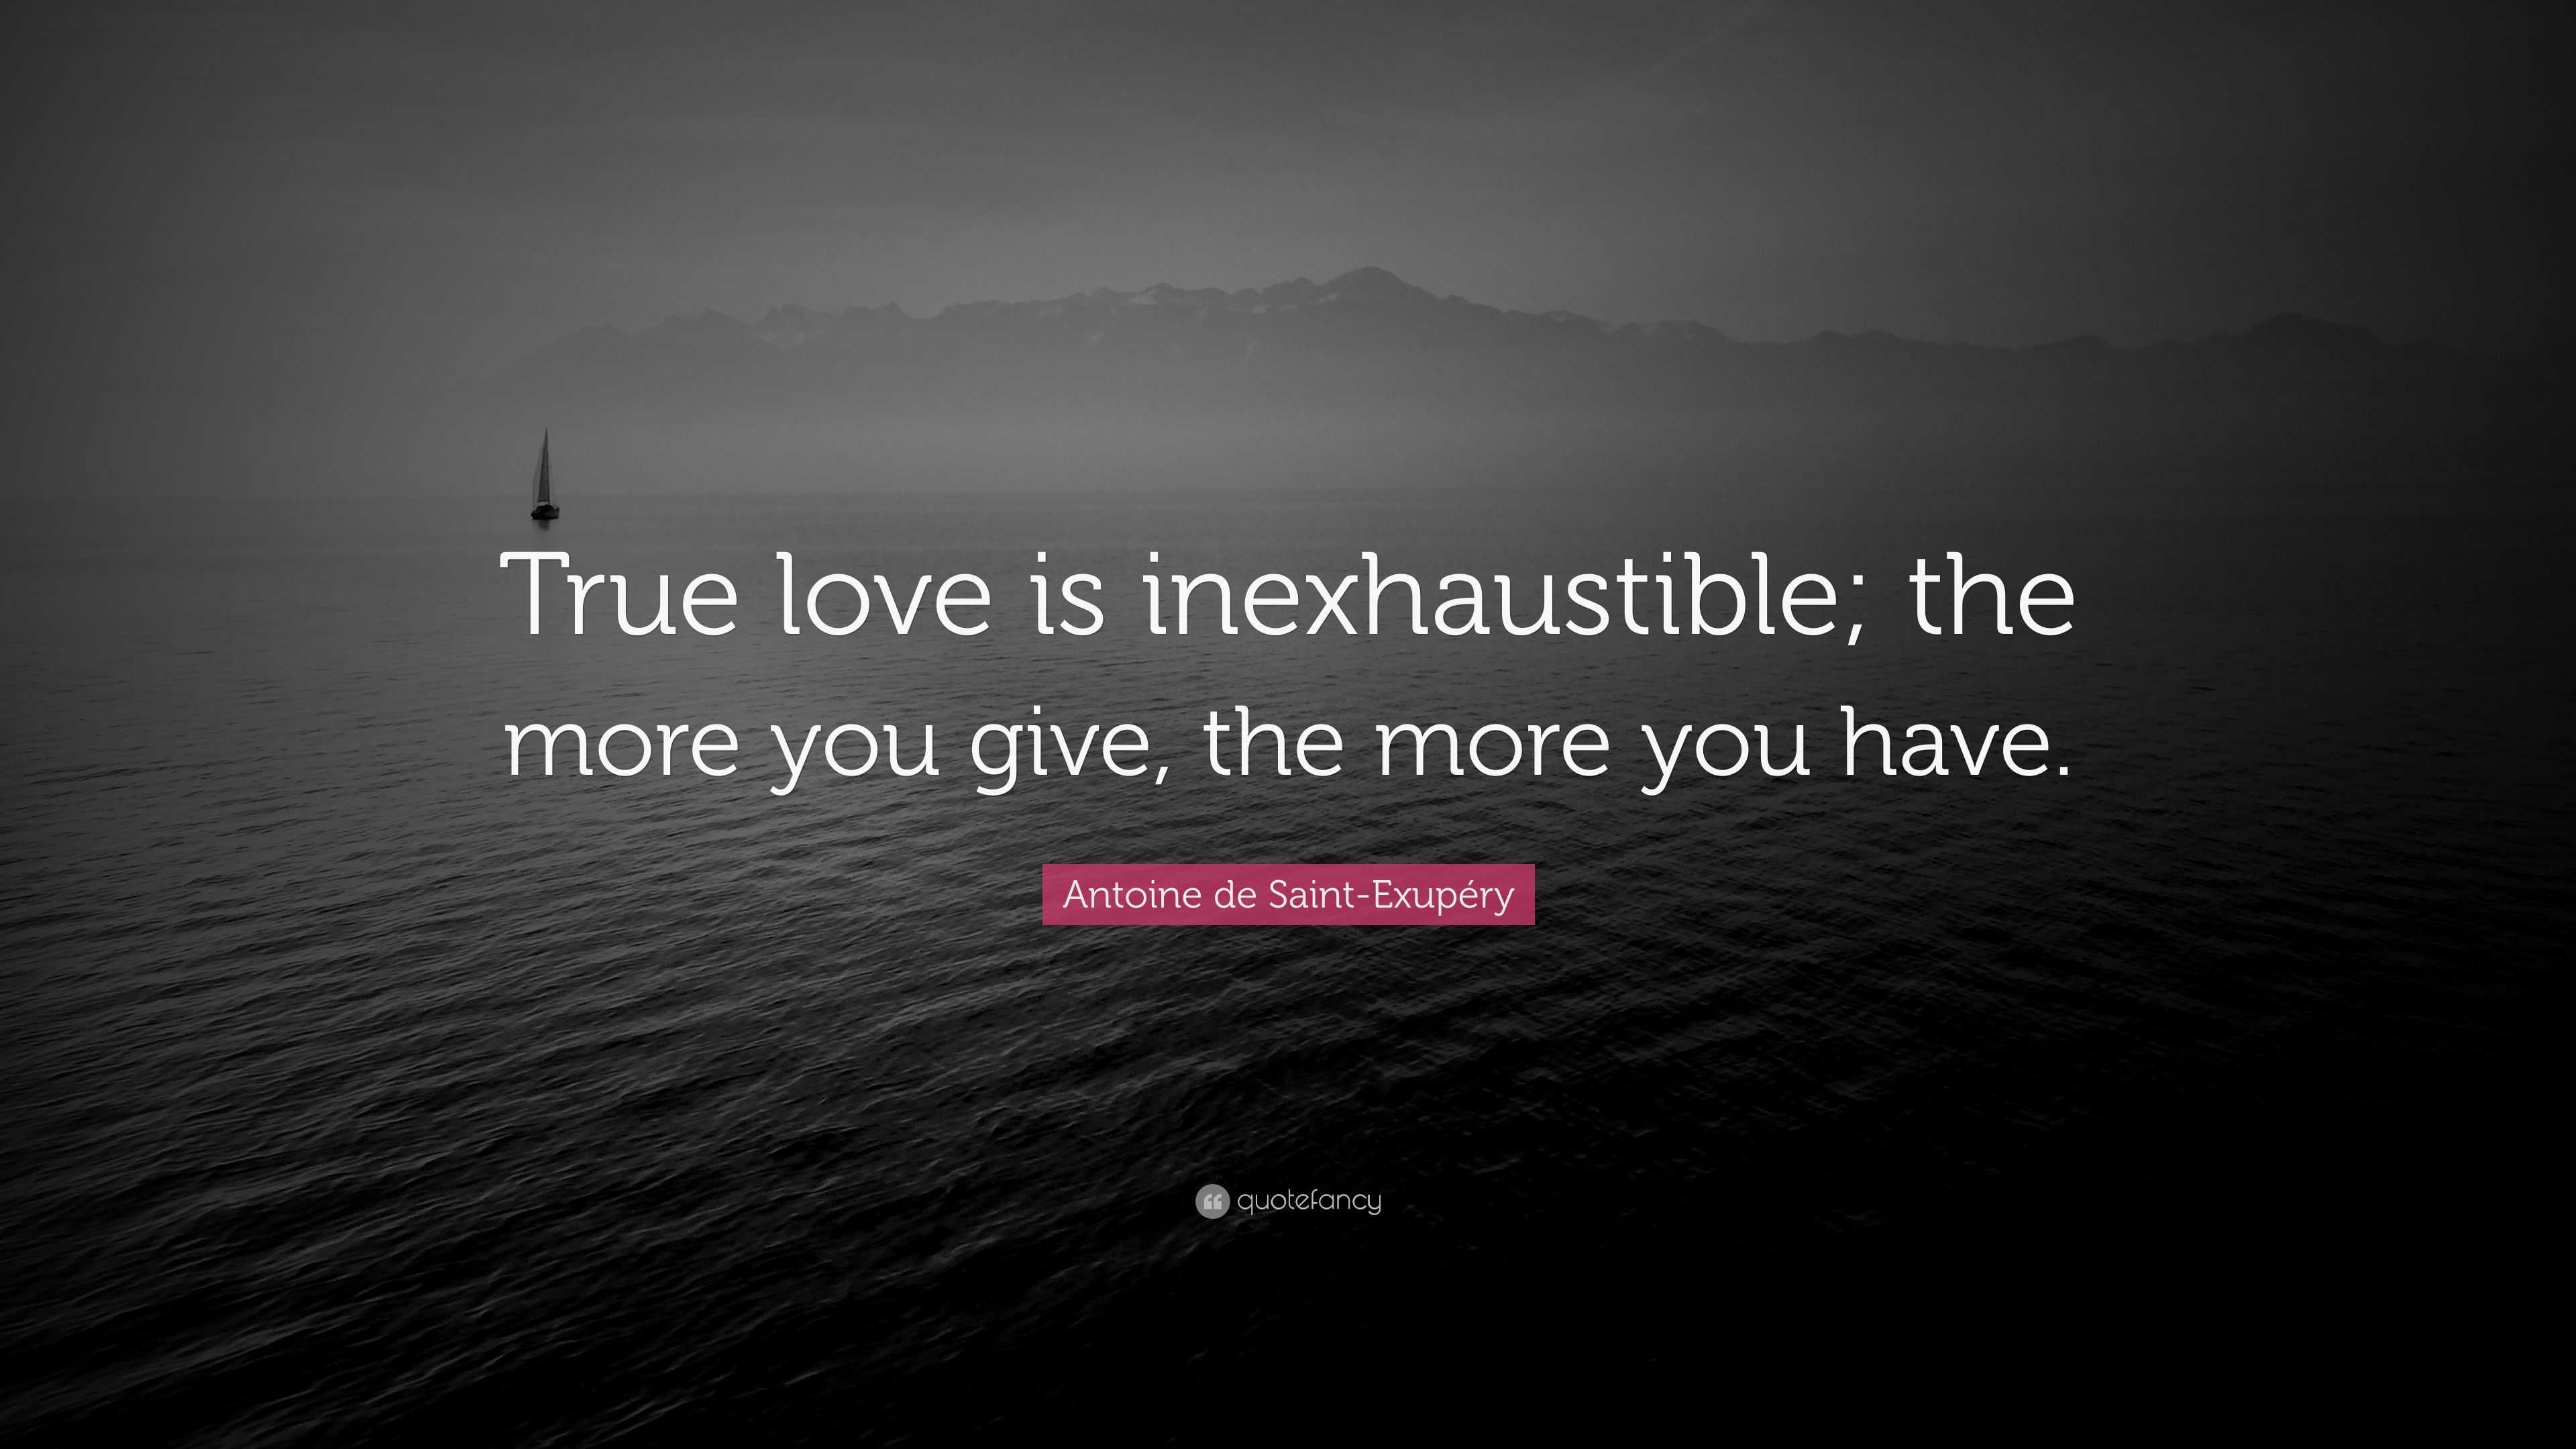  True love is inexhaustible; the more you give, the